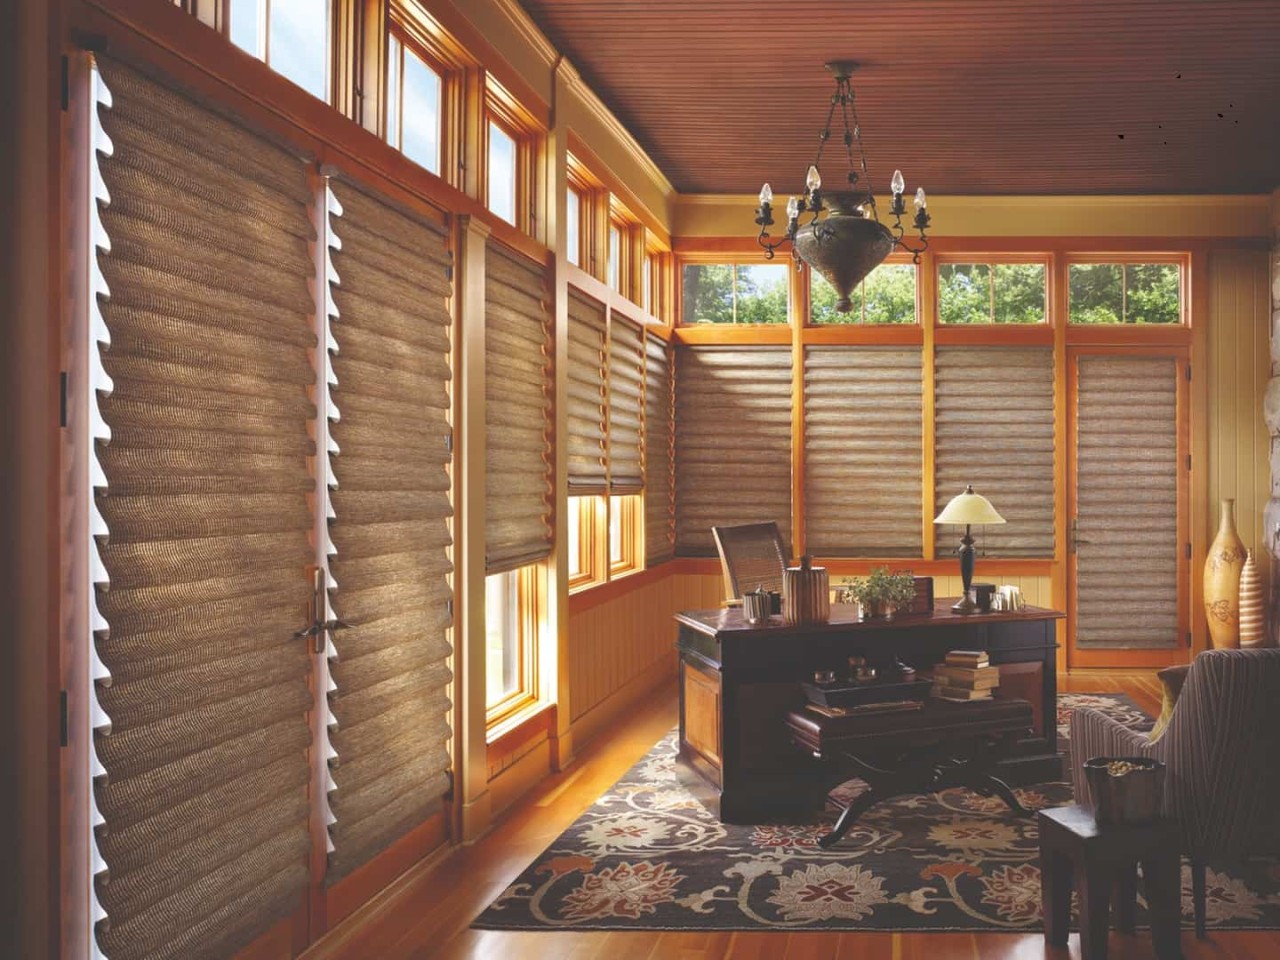 Using shades in your home near Anaheim, California (CA) like Vignette® roman shades from Hunter Douglas.